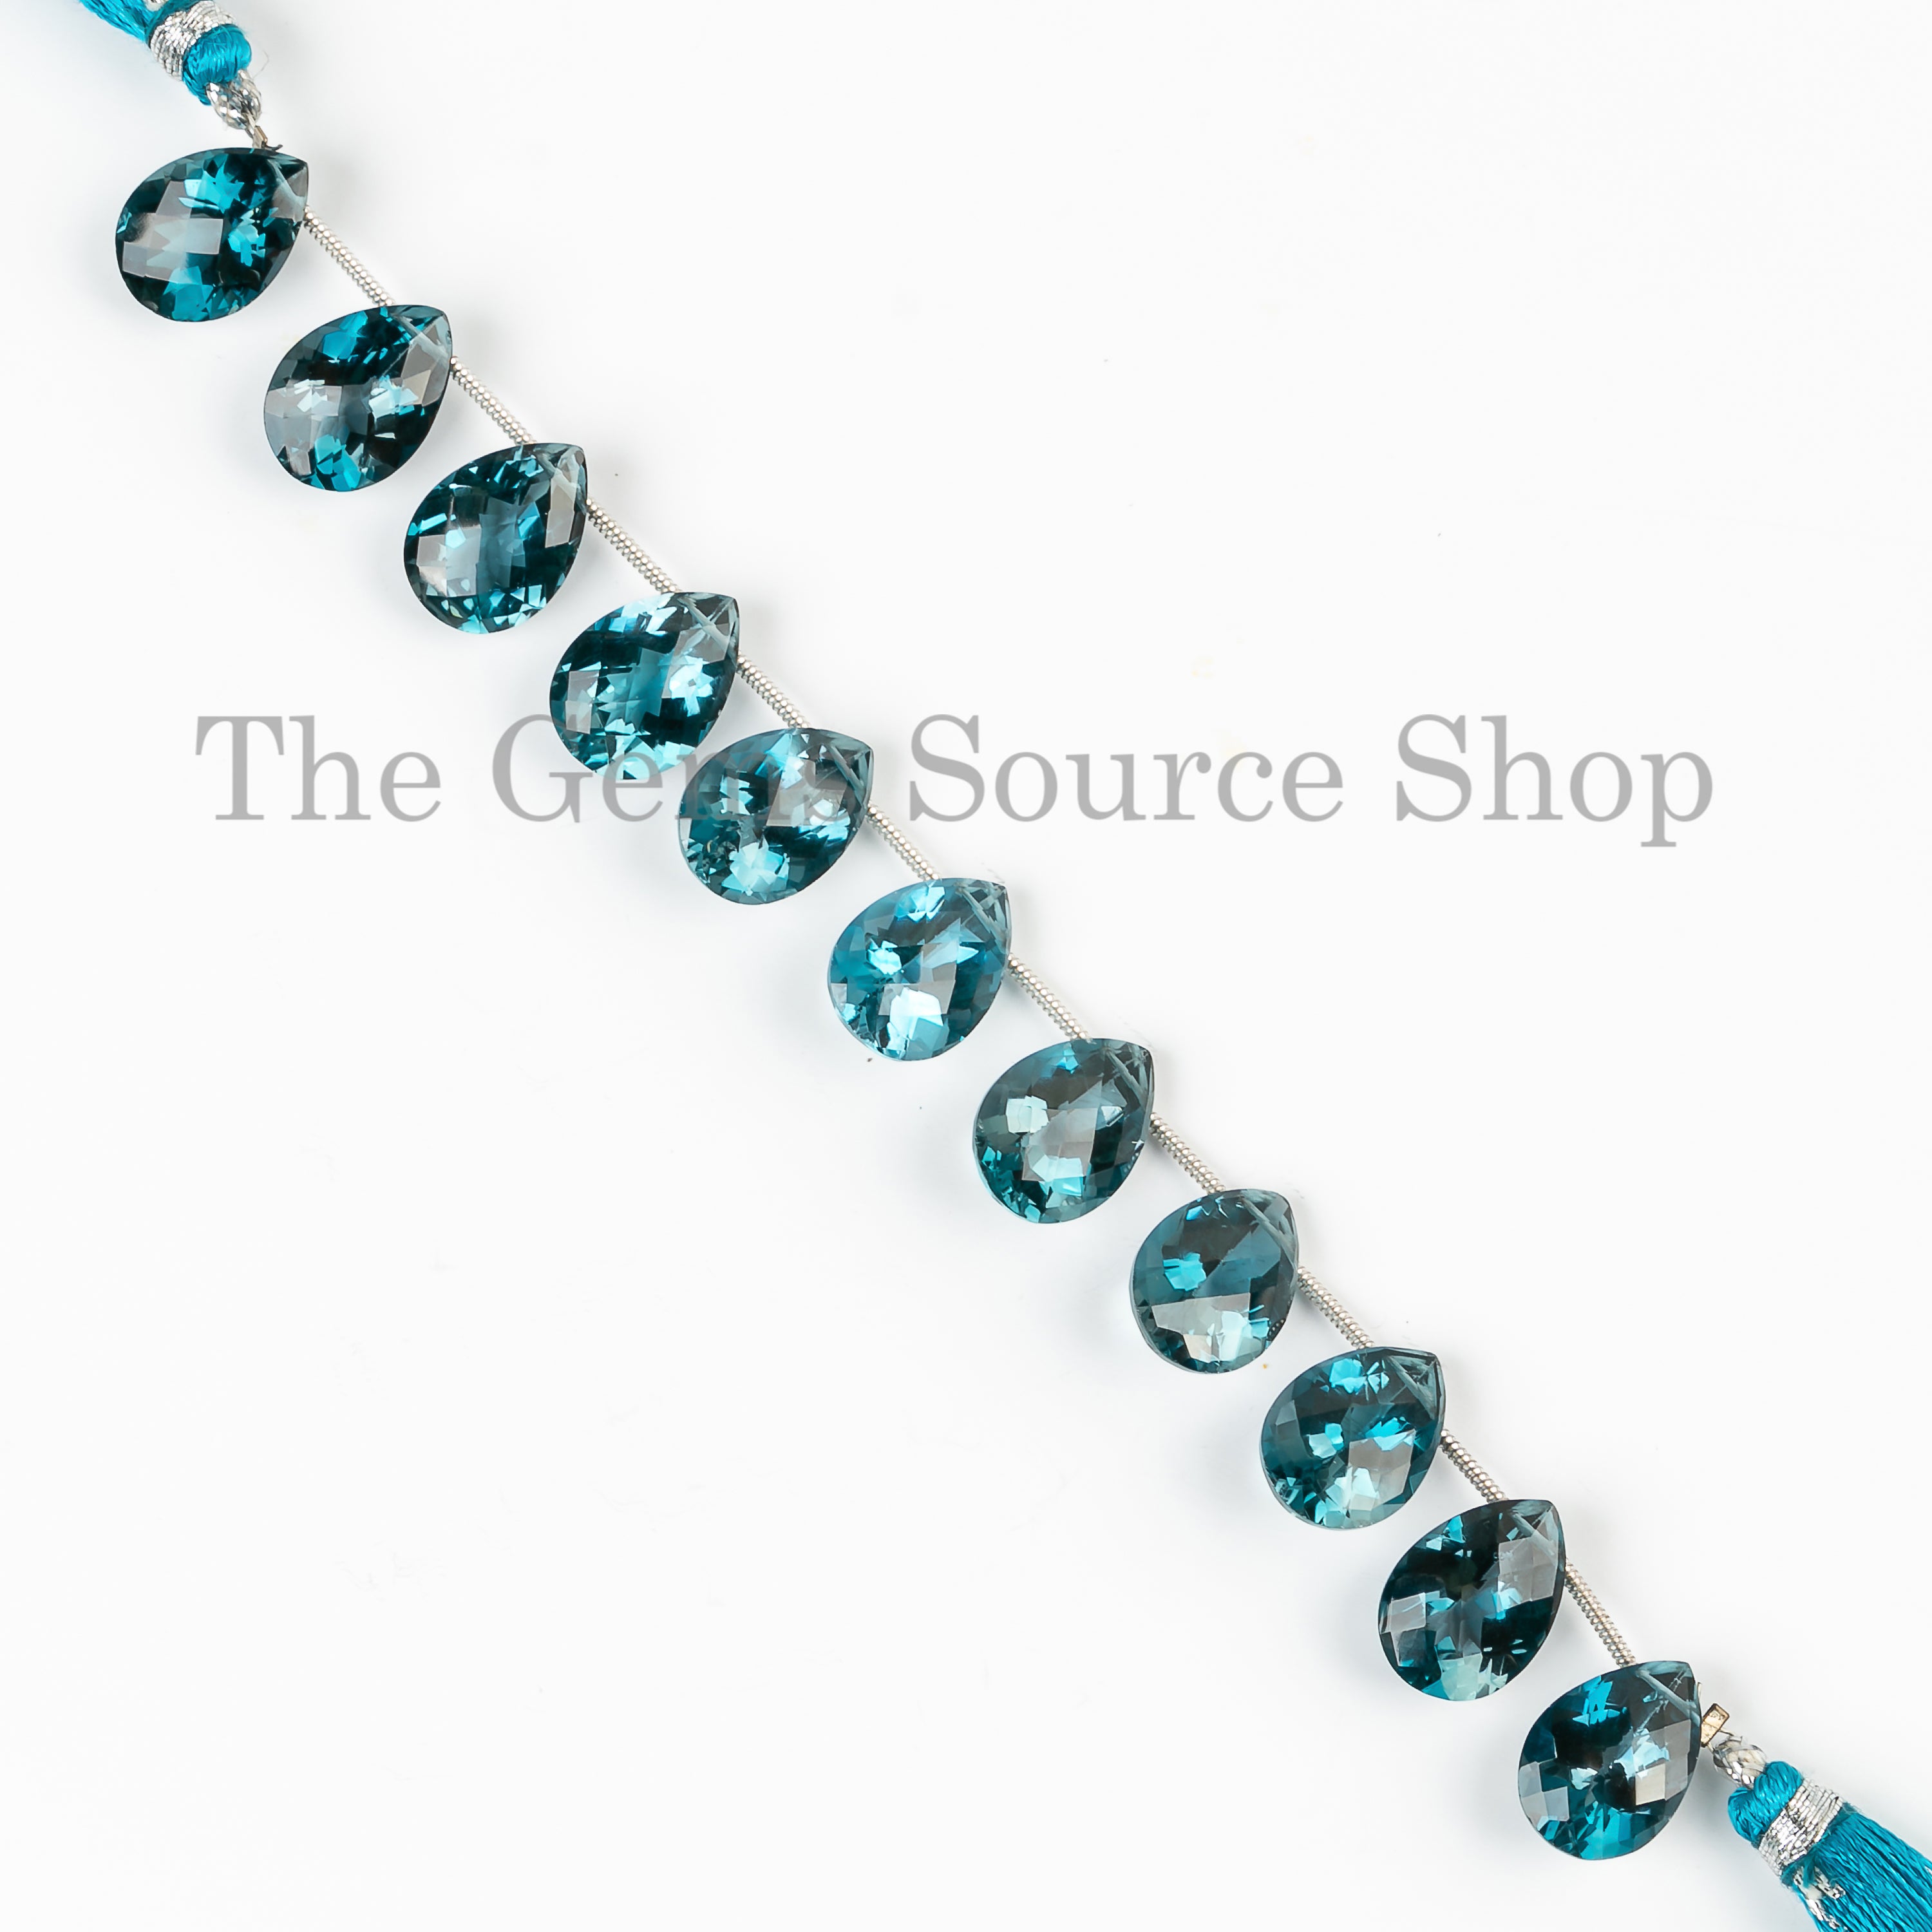 Extremely Rare London Blue Topaz Faceted Pear Shape Gemstone Beads